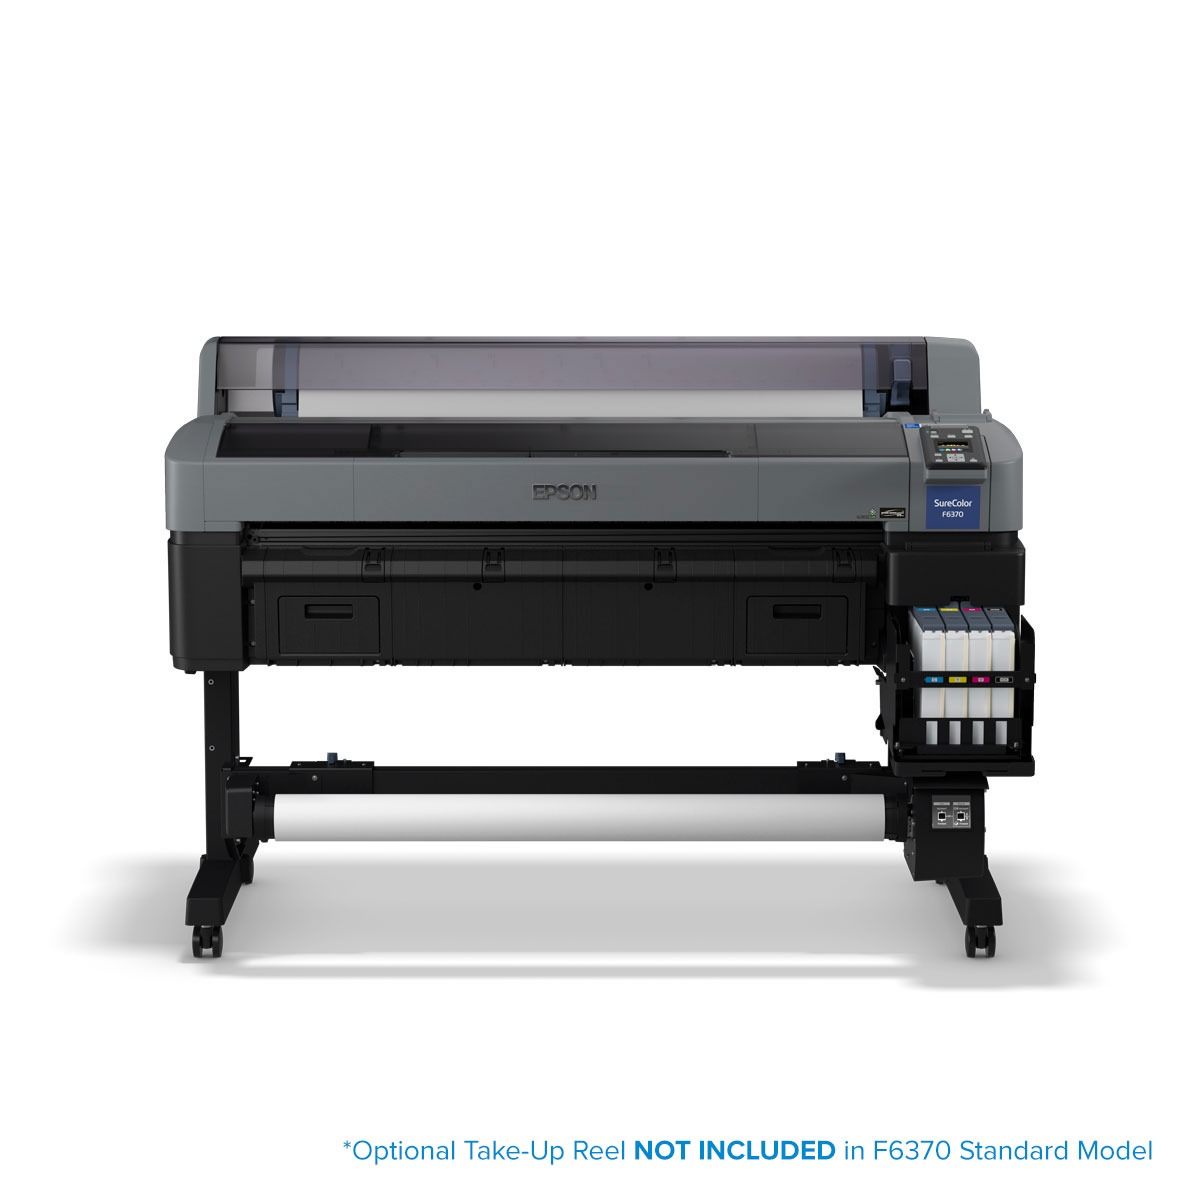 Link Submerged Inquiry EPSON SureColor F6370 Standard Edition Printer - 44" (Take-Up Reel Optional)